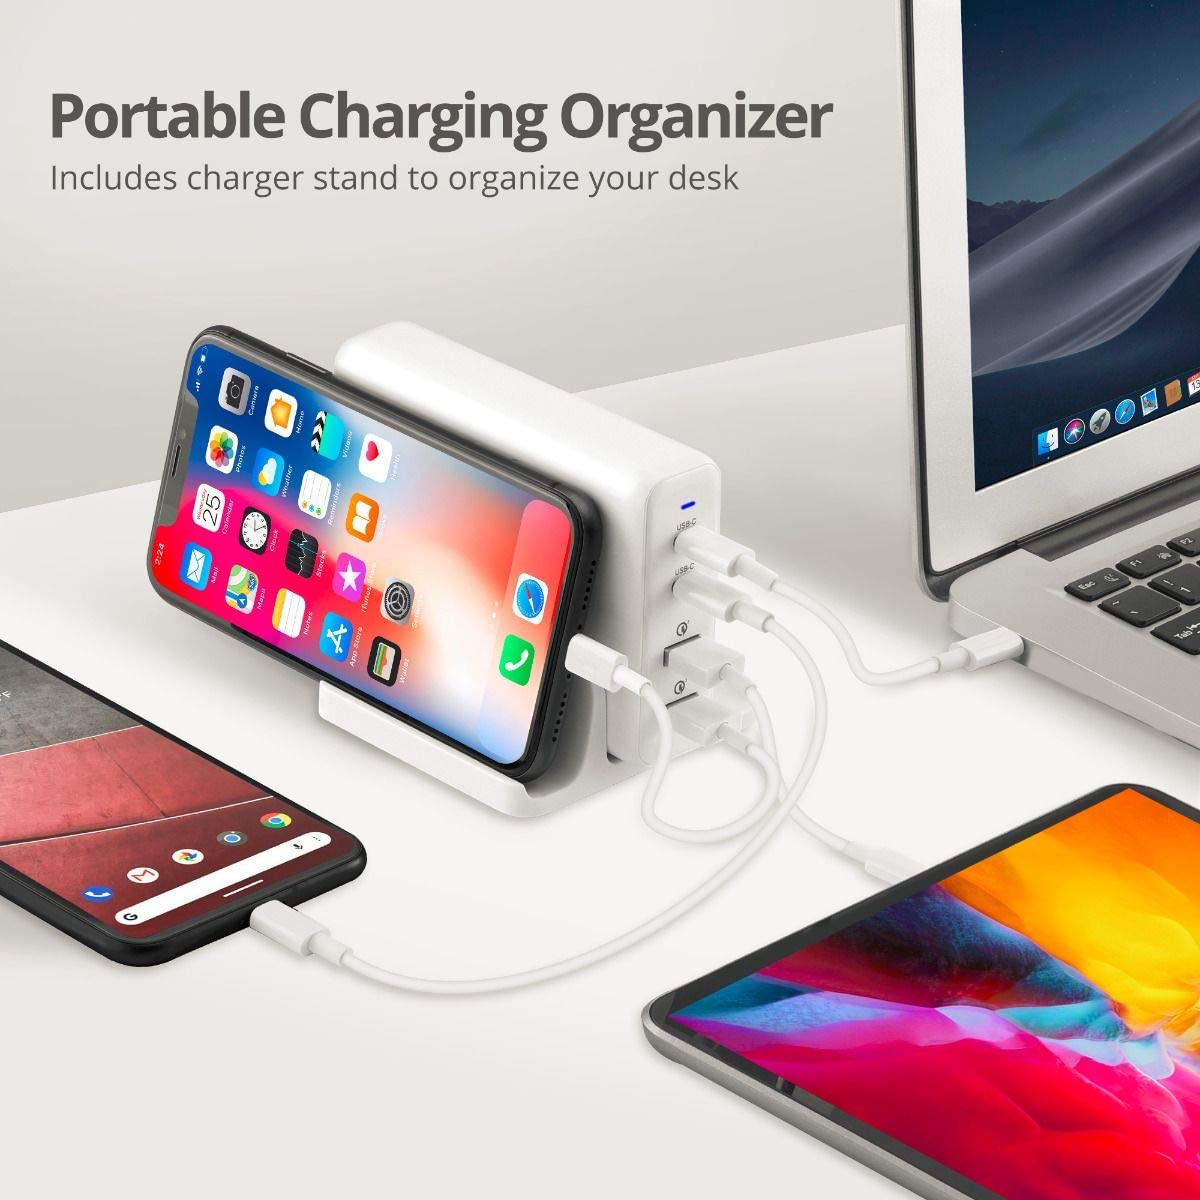 SIIG 100W Dual USB-C PD &amp; QC 3.0 Combo Power Charger -White, USB-C Charger,2X PD 3.0 USB-C + 2X QC 3.0 USB-A,for MacBook,iPad,iPhone,XPS,Pixel,and More Phone/Laptop/Tablet AC-PW1P11-S1